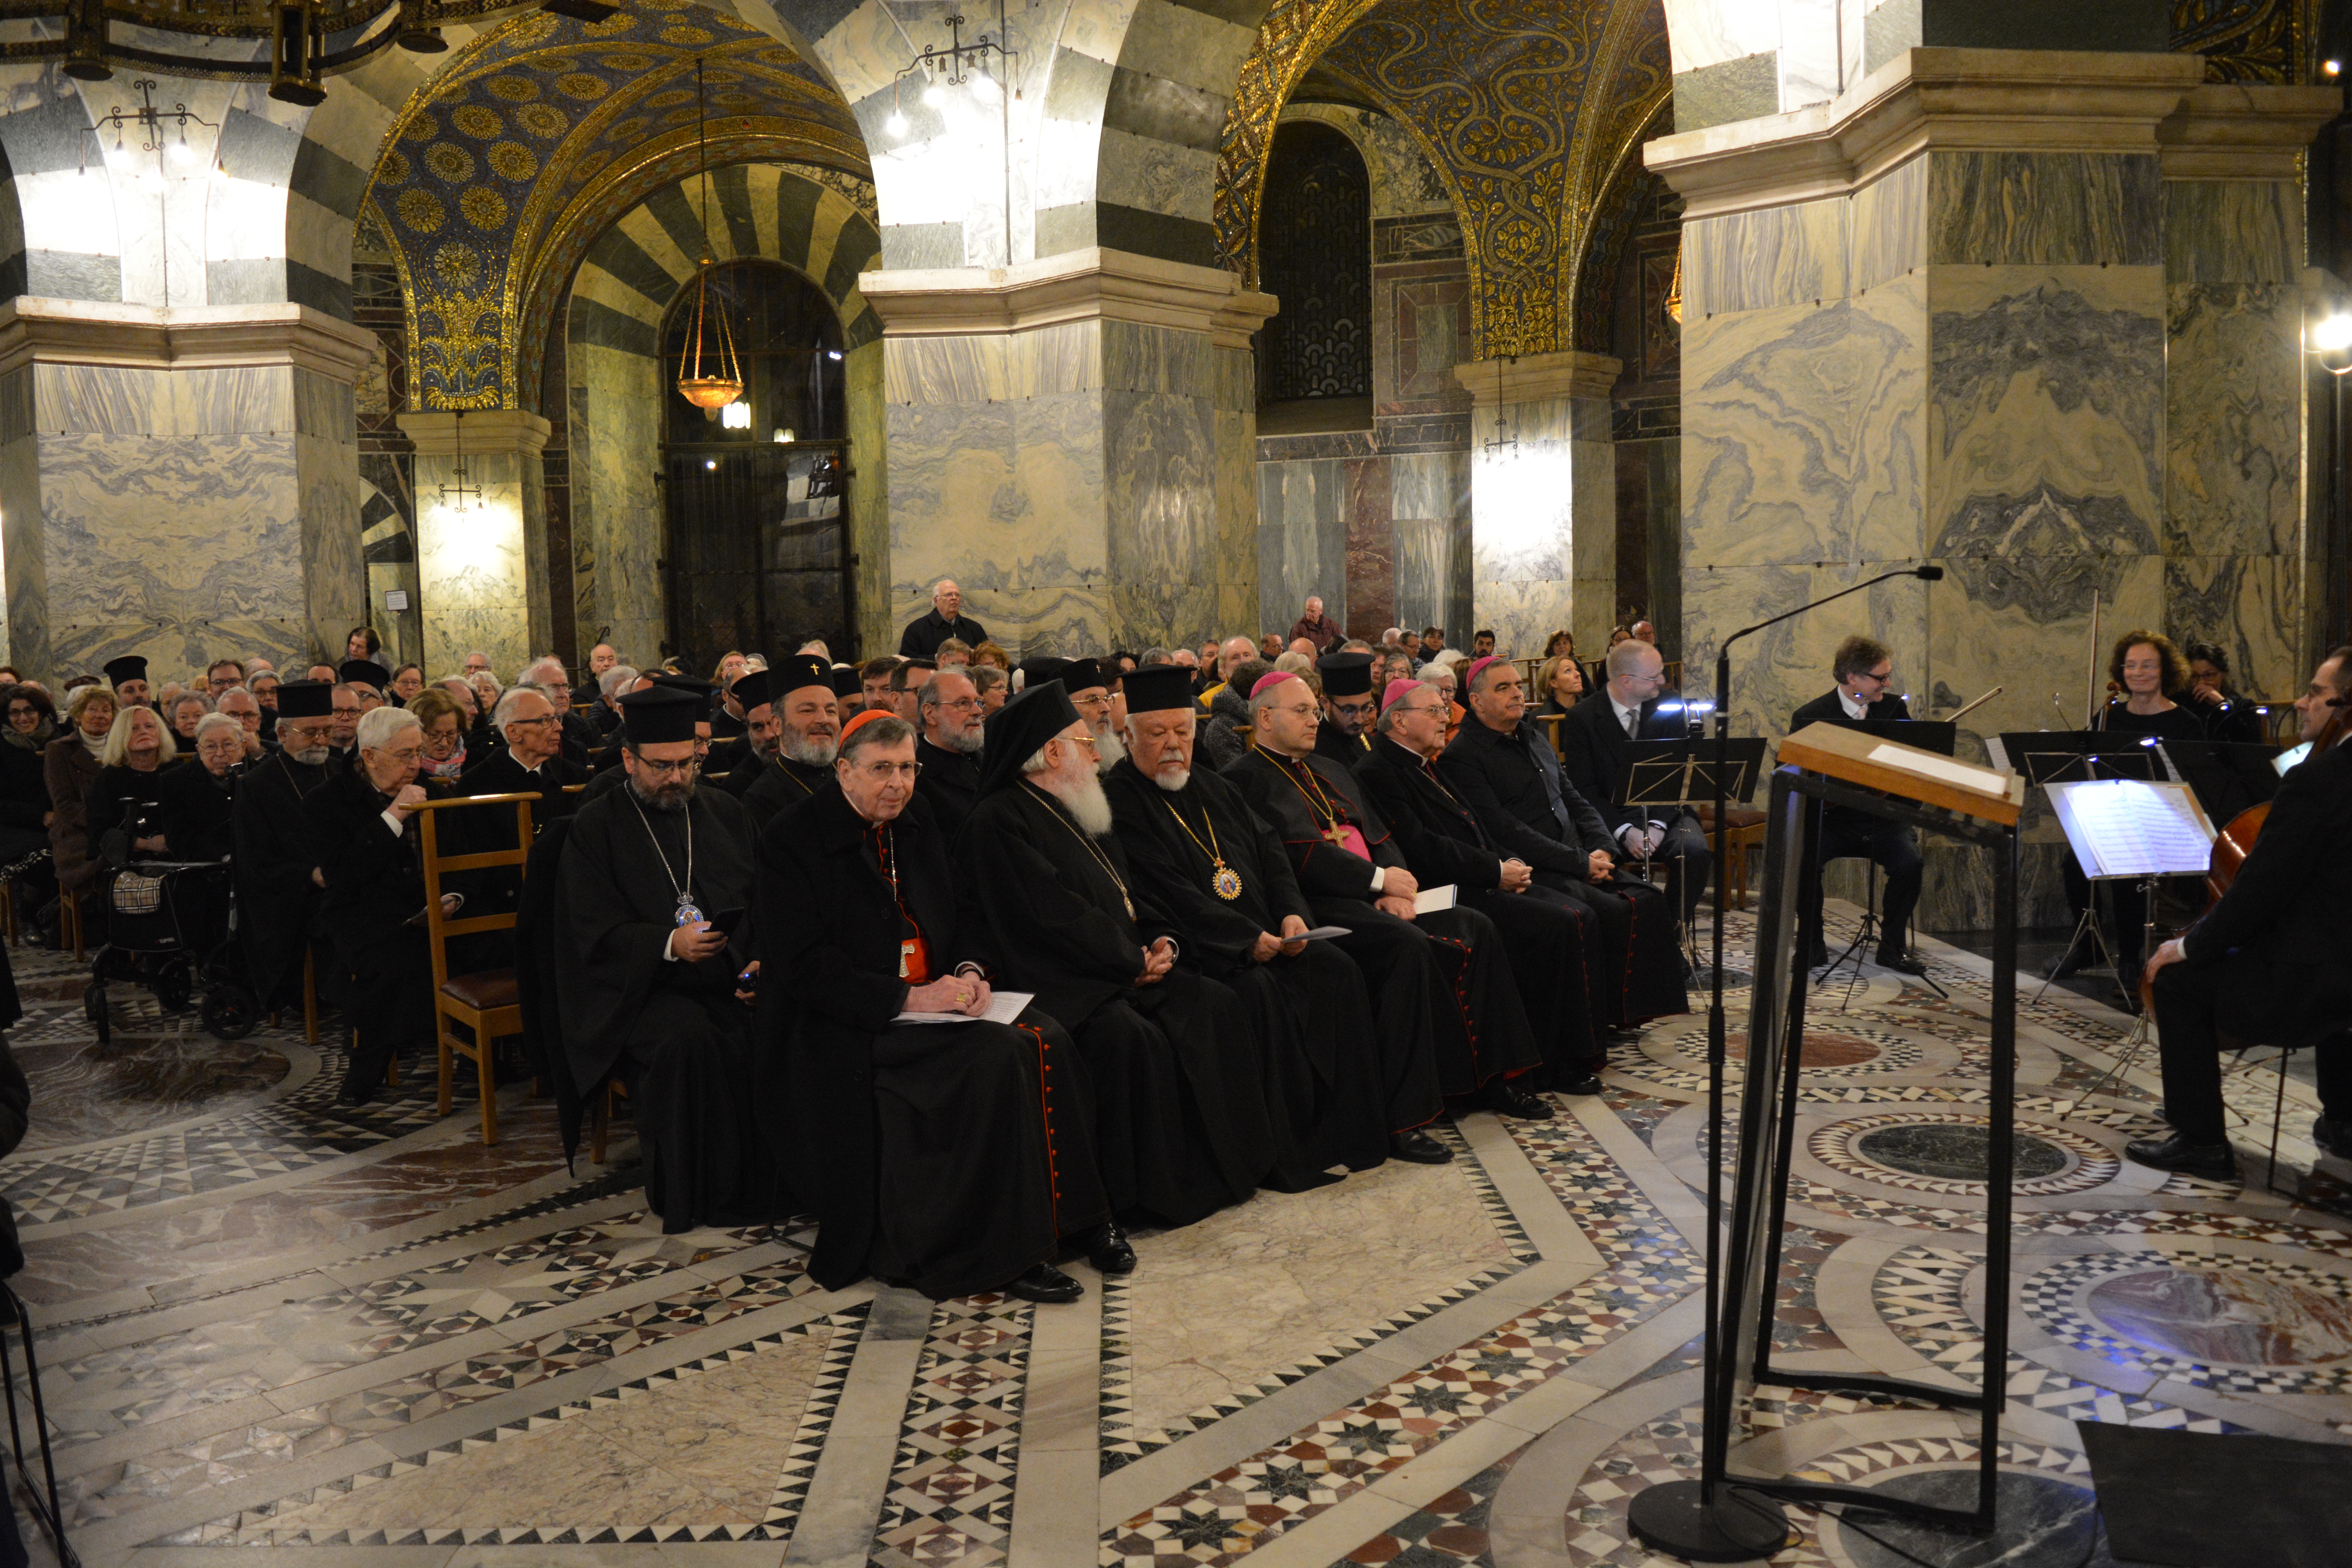 Guests from the Orthodox Churches in Germany